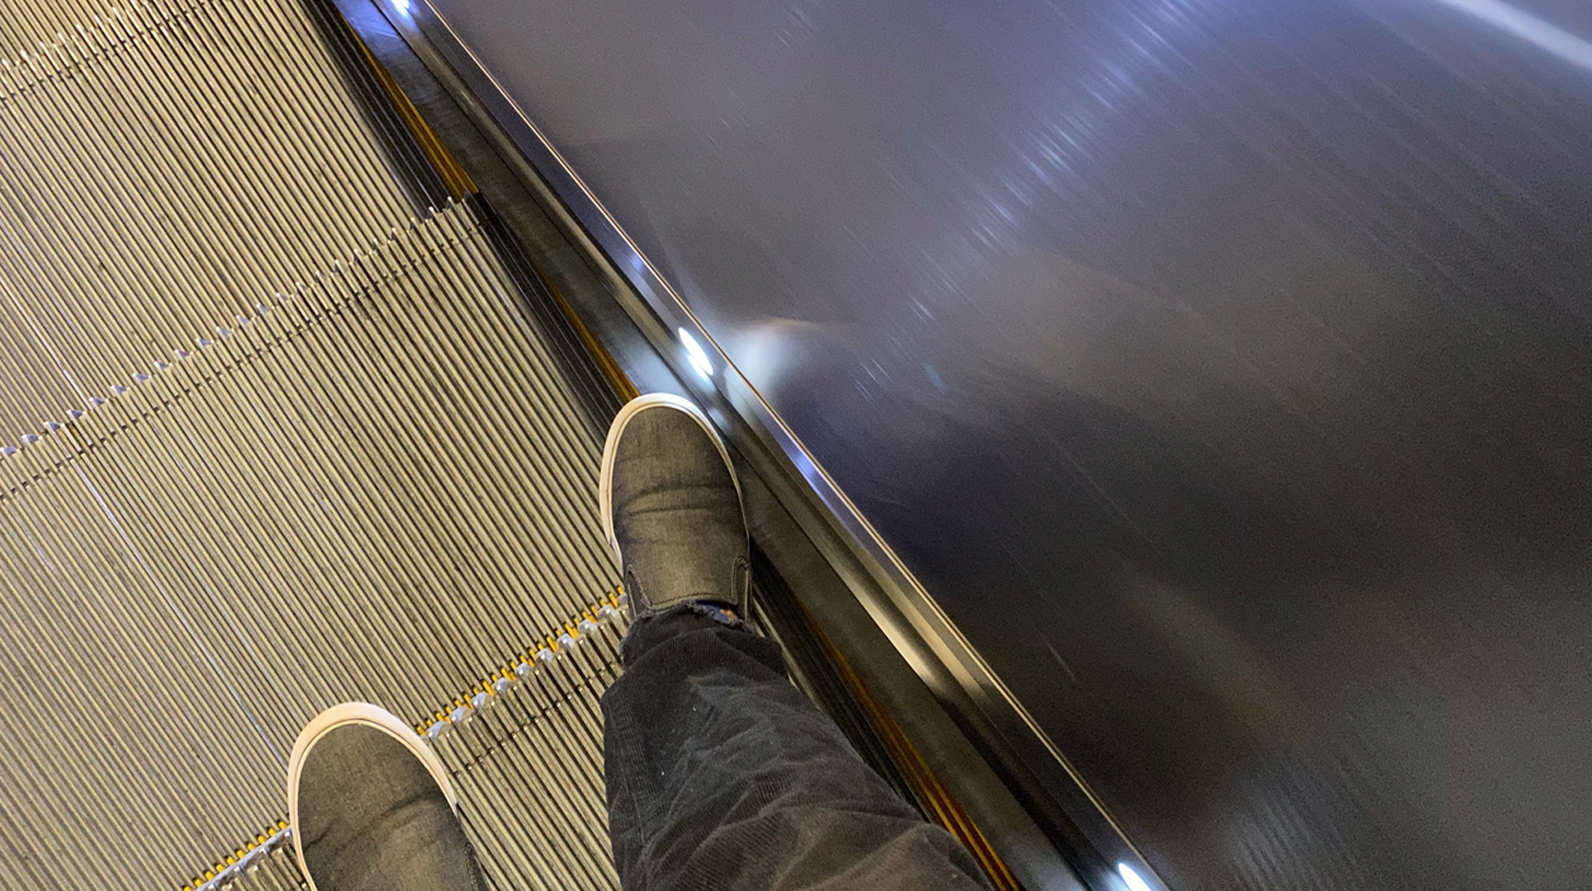 Here’s What Those Brushes On Escalator Sides Are For And Why I Don’t Think They Work